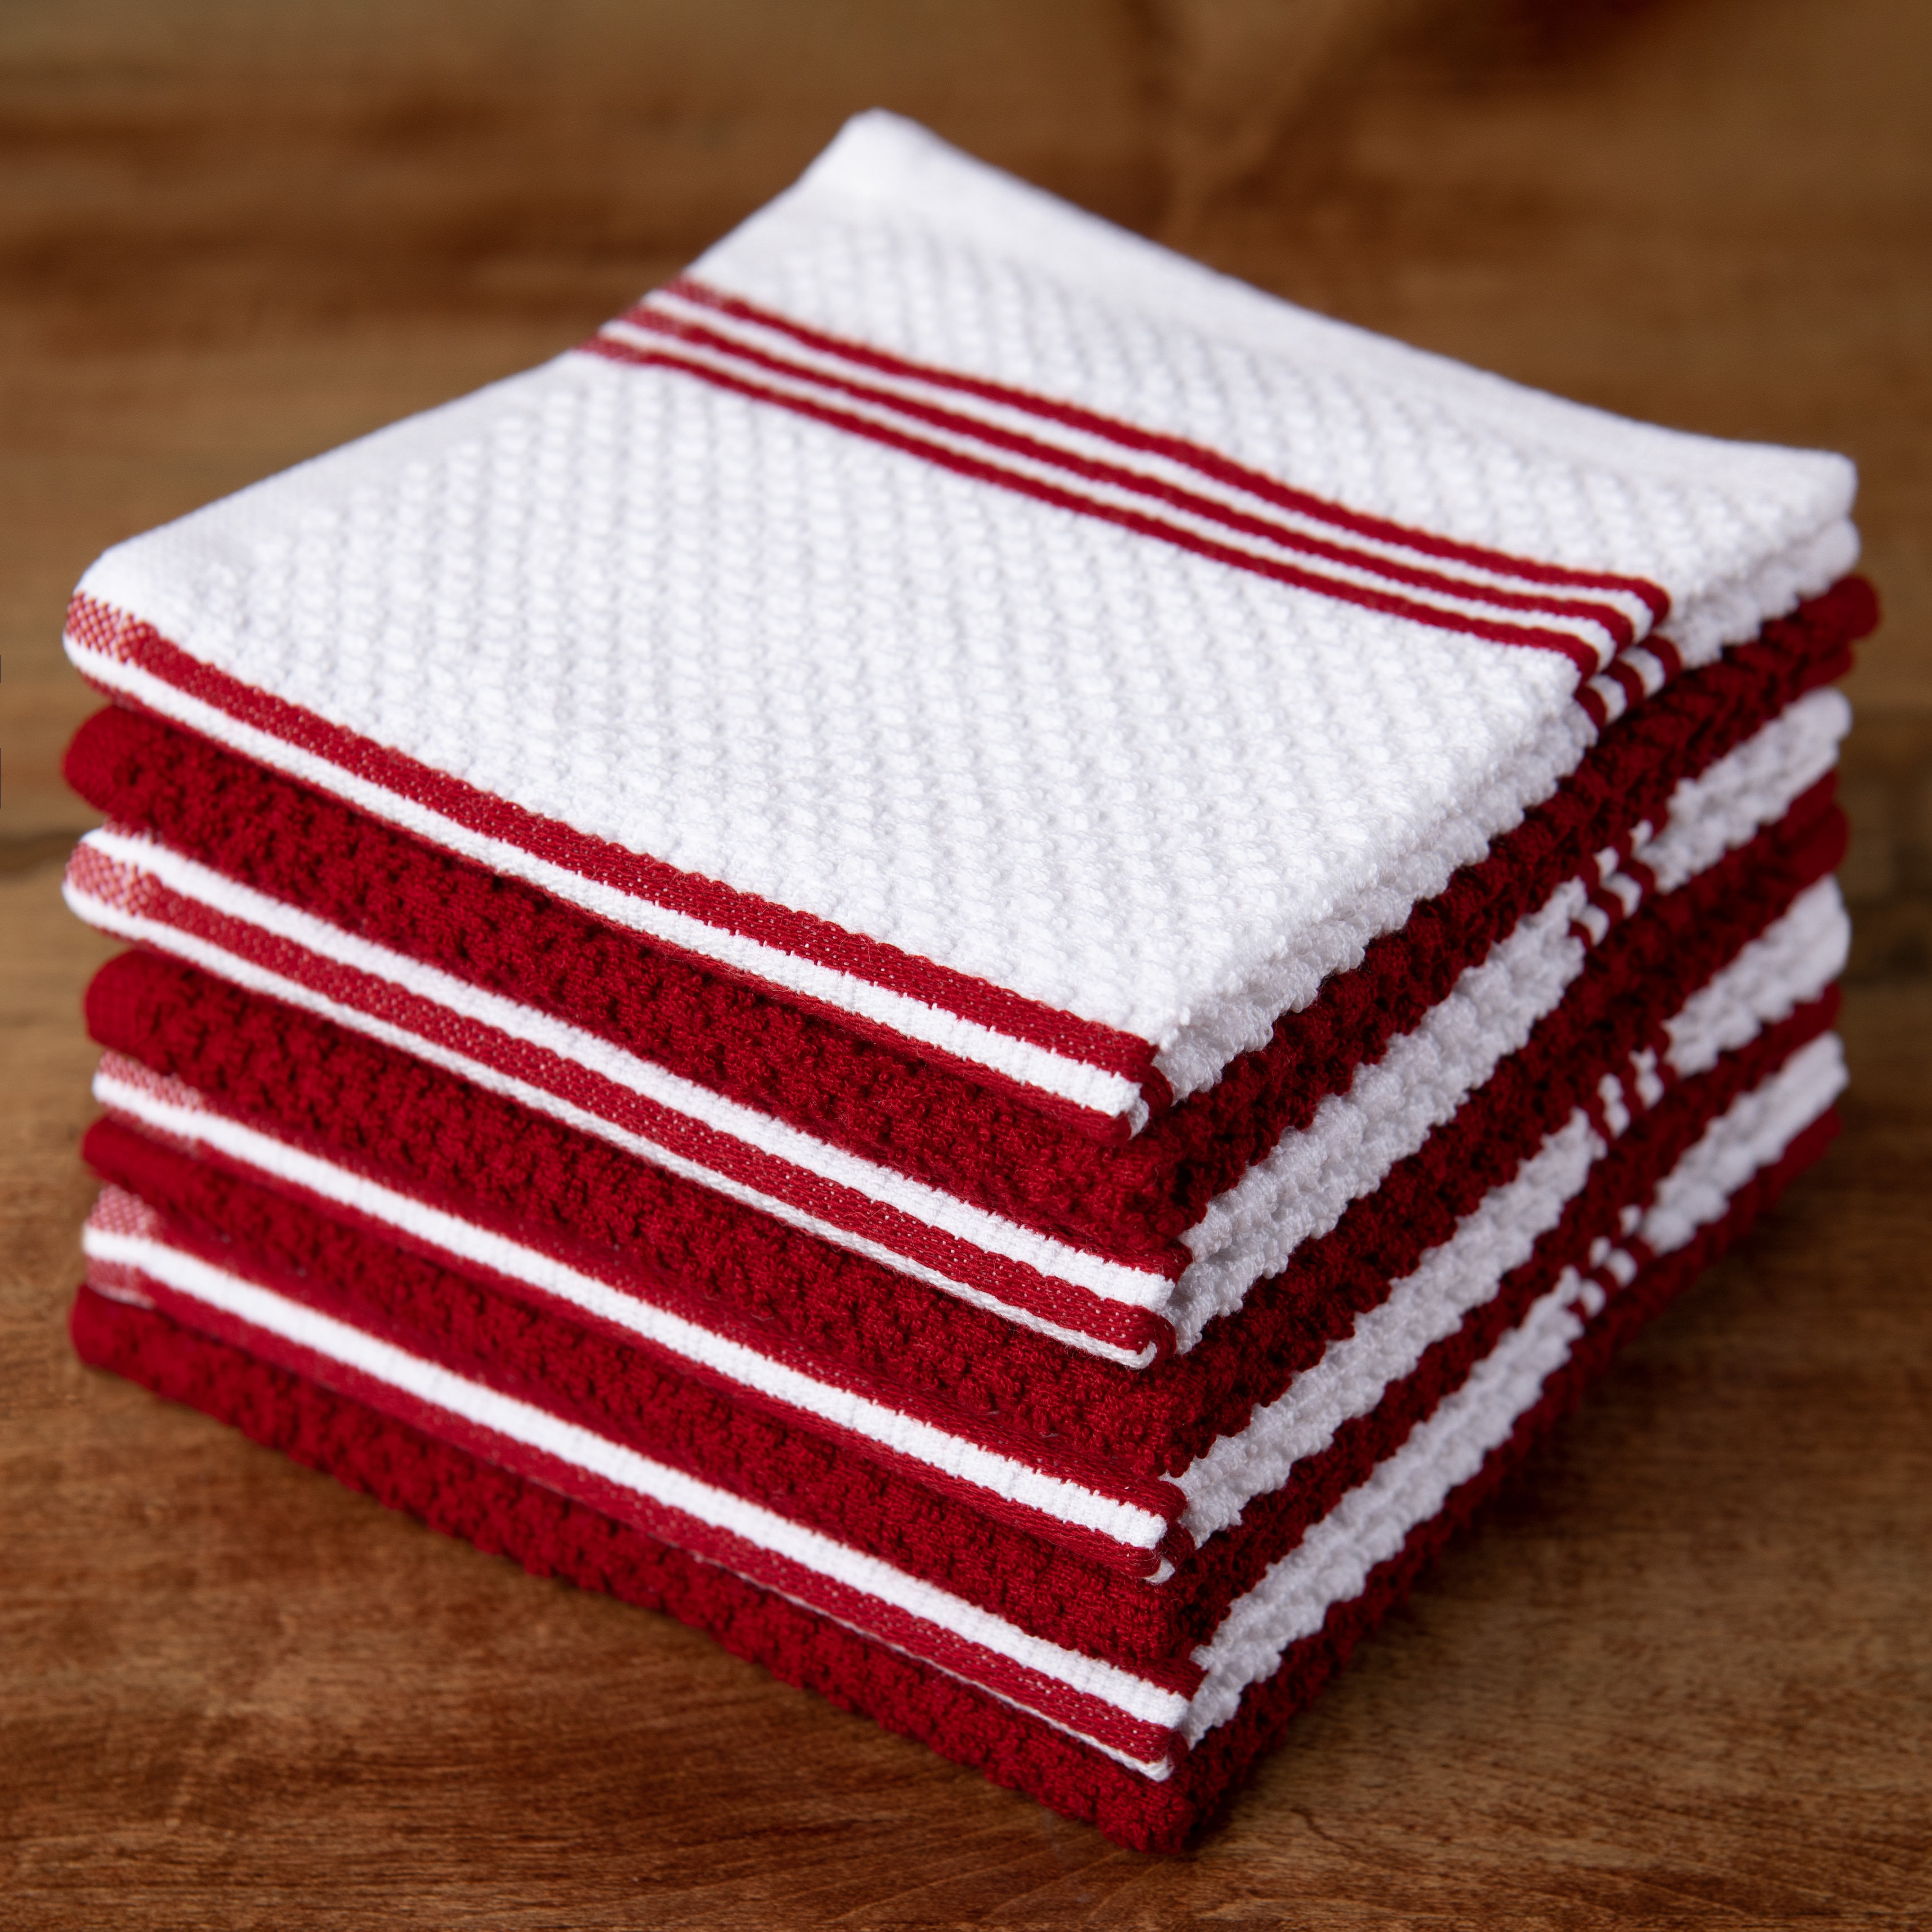 Hache Dish Towel with Dish Cloth | Red, White & Blue Stripes on White